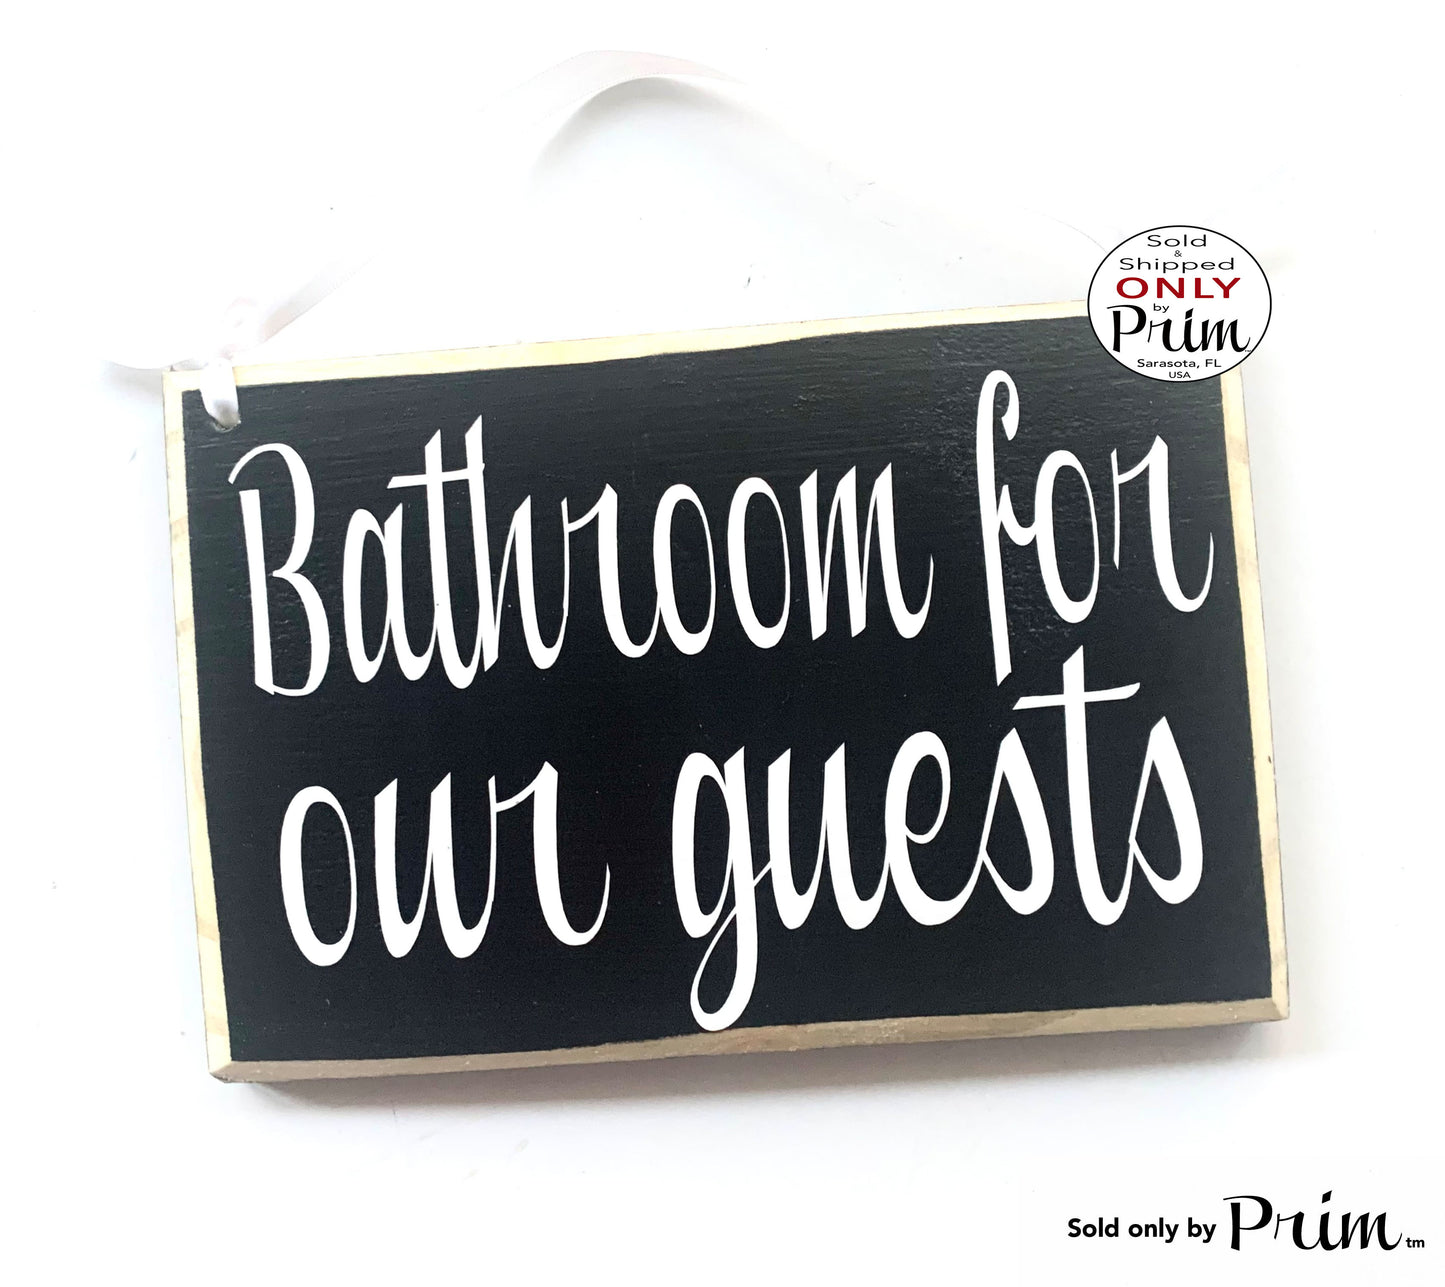 8x6 Bathroom for our Guest Custom Wood Sign Bathroom Restroom Outhouse Washroom airbnb Bed and Breakfast Inn Hotel Door Plaque Designs by Prim